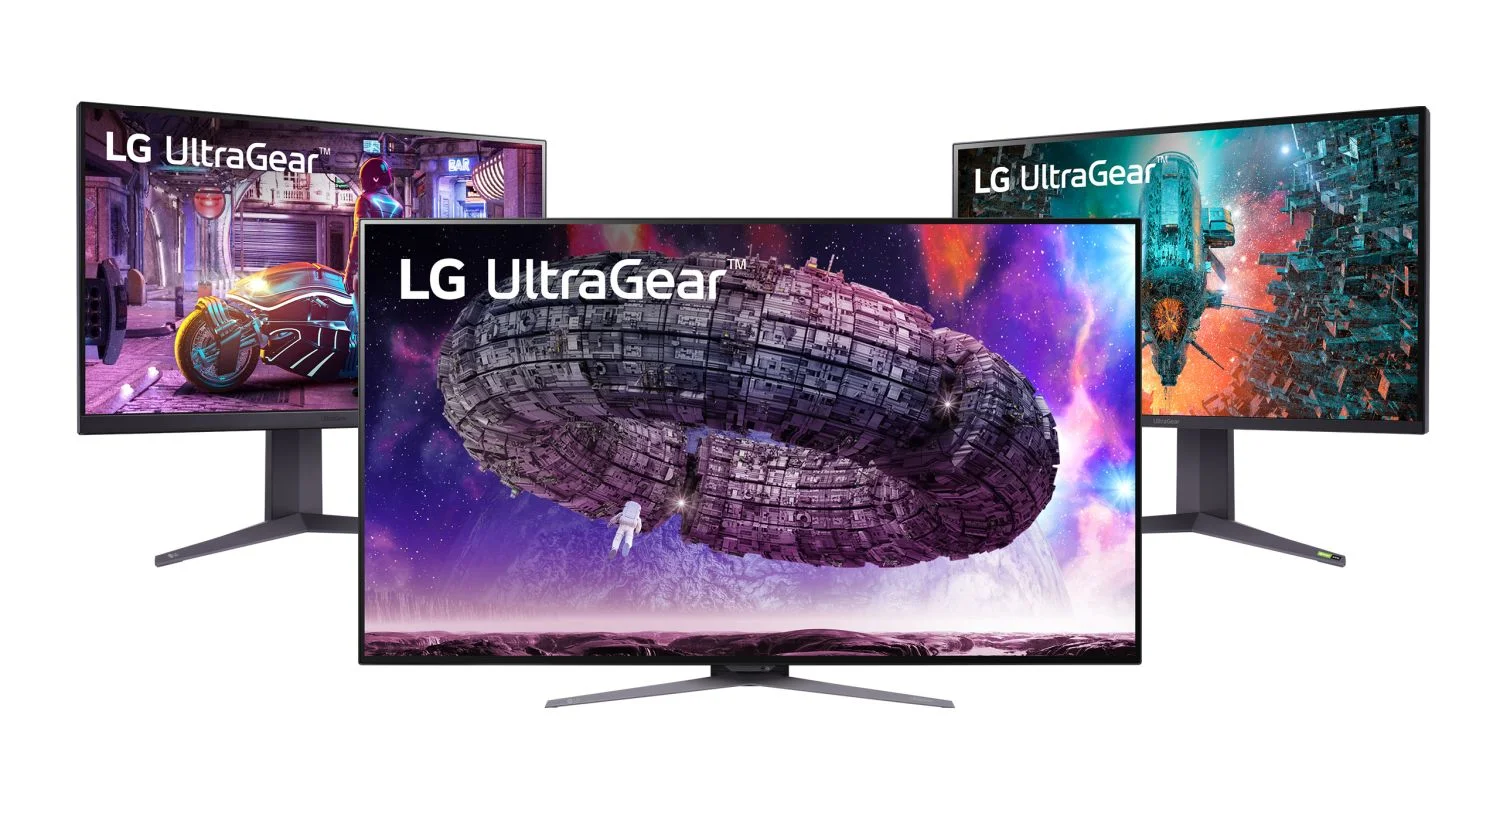 LG UltraGear 2022 Gaming Monitors Now Available In Malaysia  Starts From RM3150 - 18